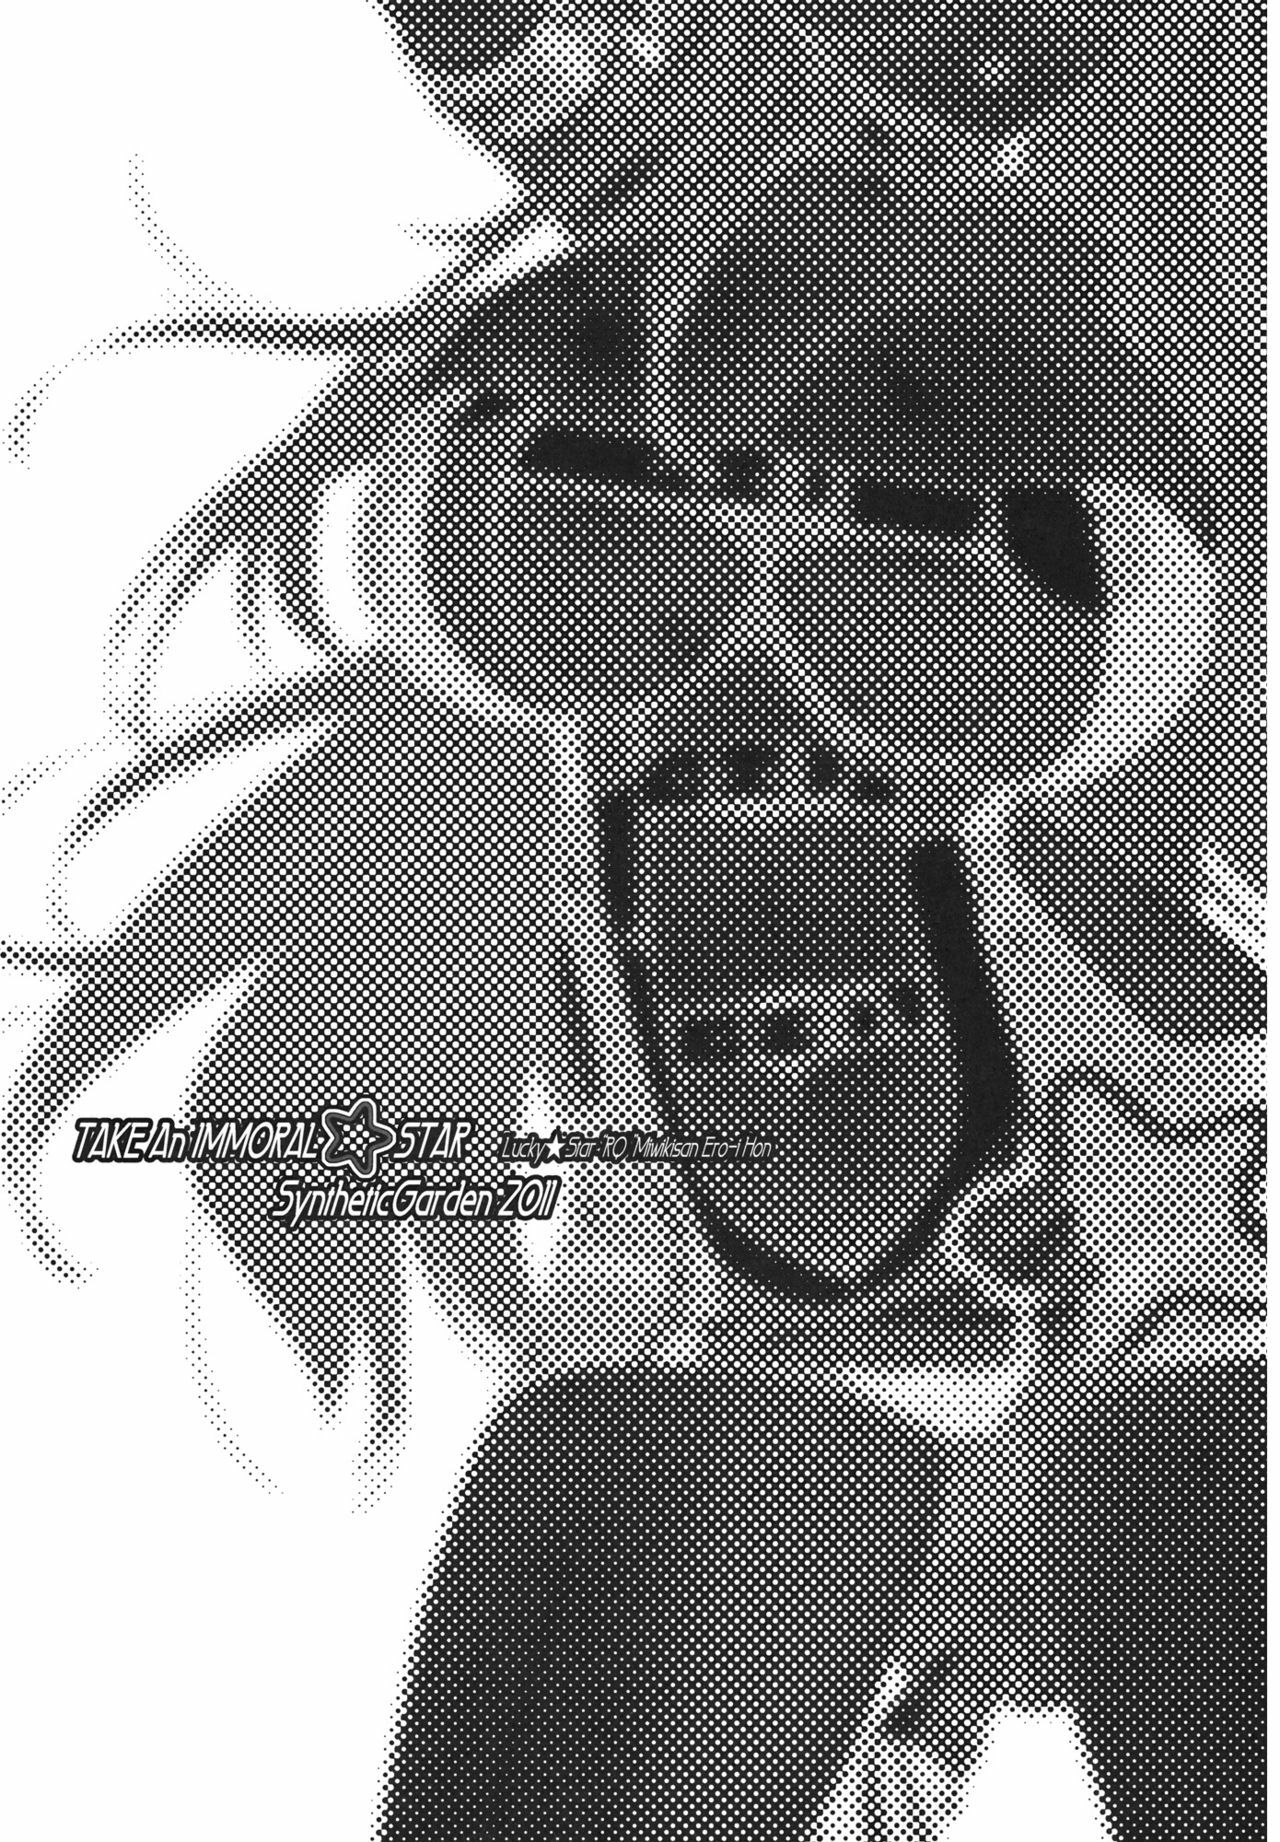 (C80) [SyntheticGarden] TAKE An IMMORAL STAR (Lucky Star) page 3 full